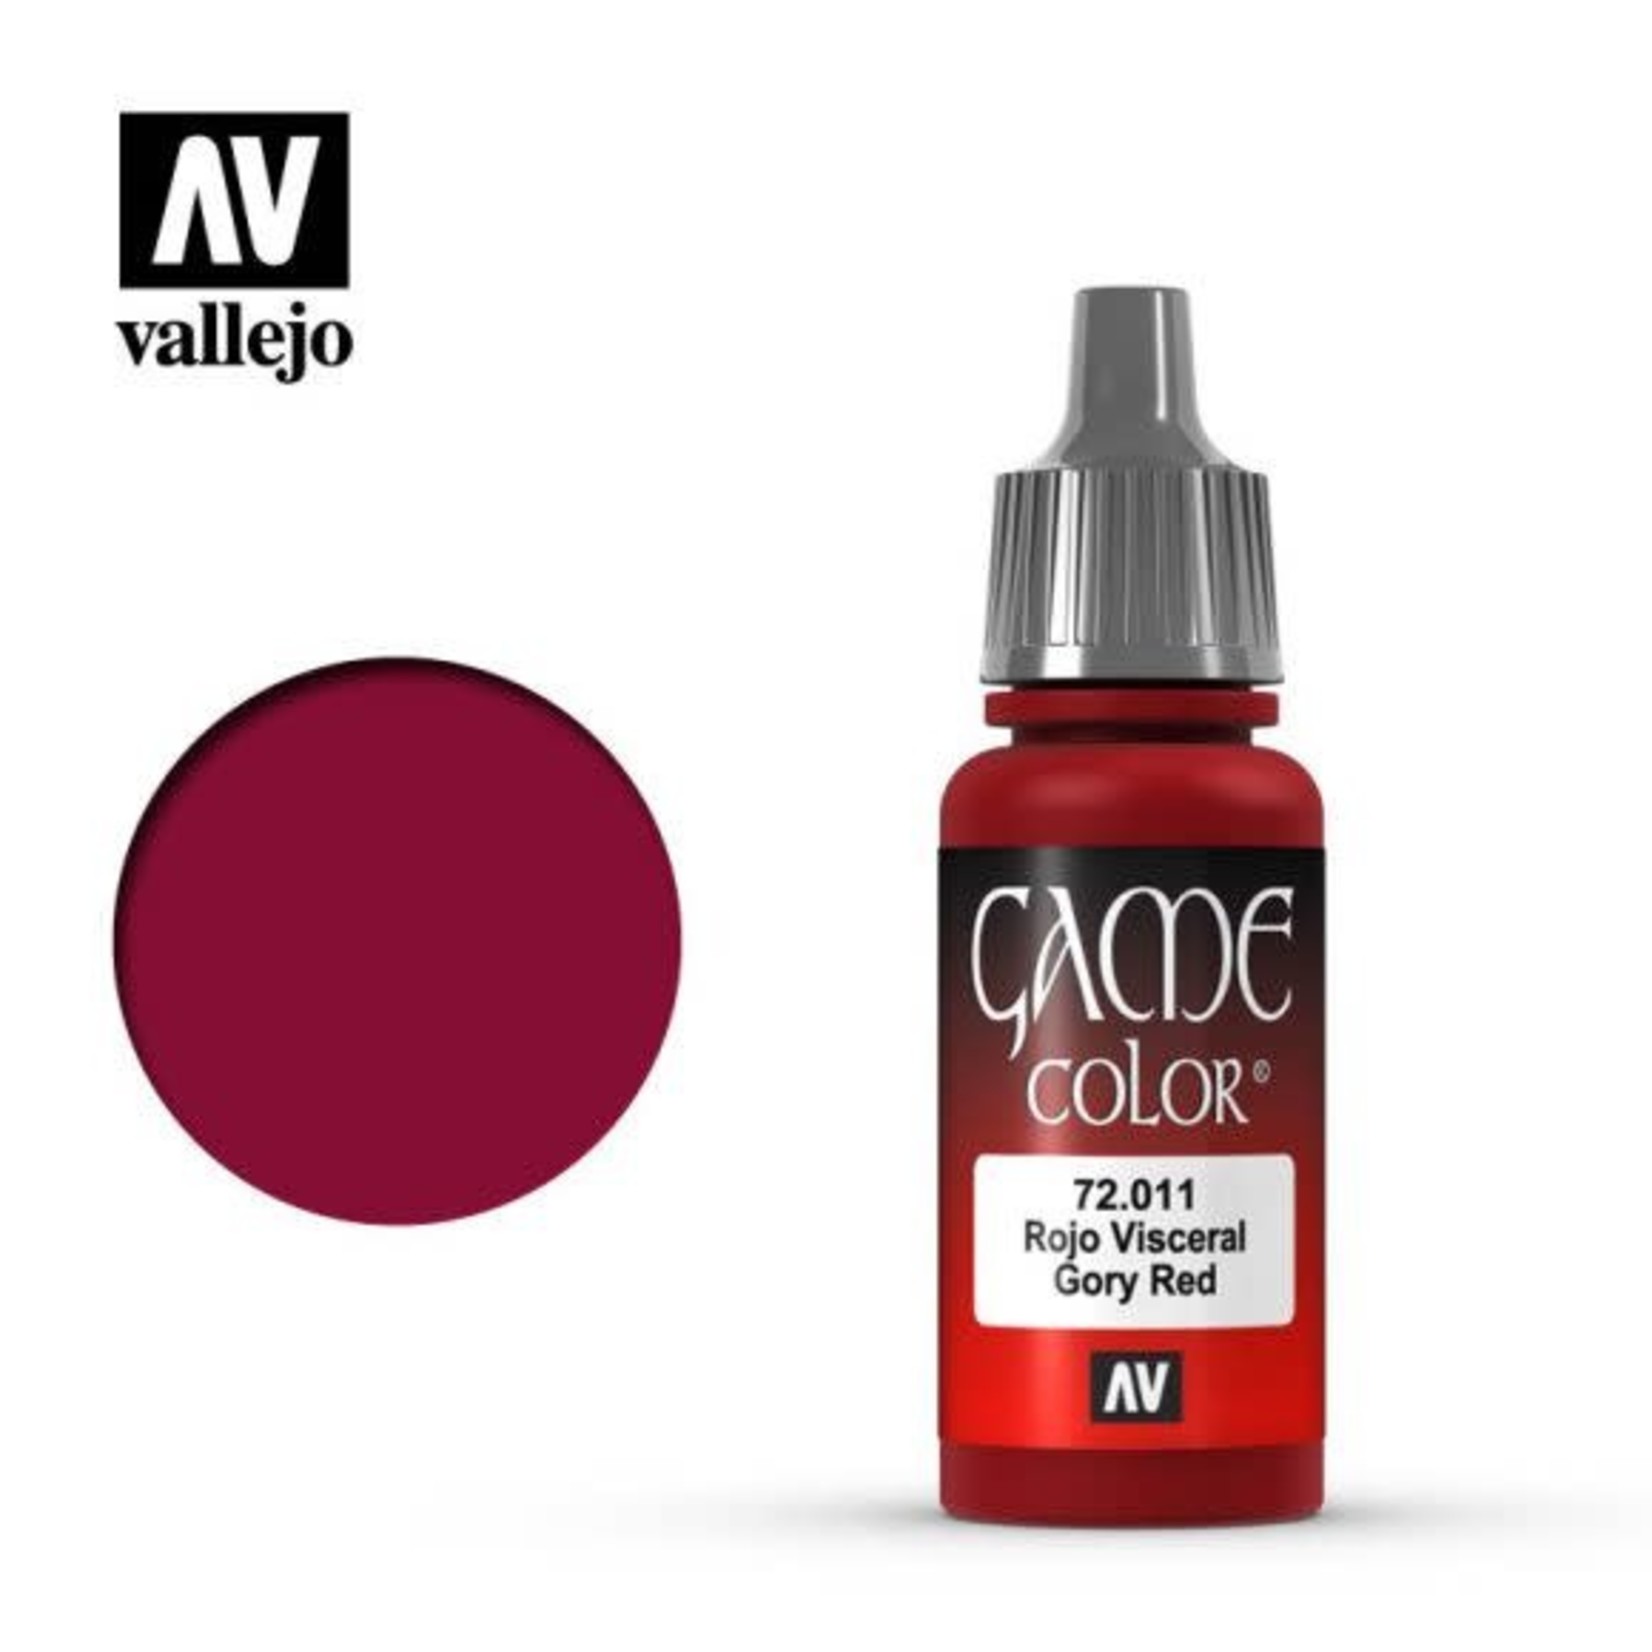 Vallejo Vallejo Game Color Paint: Gory Red 72.011